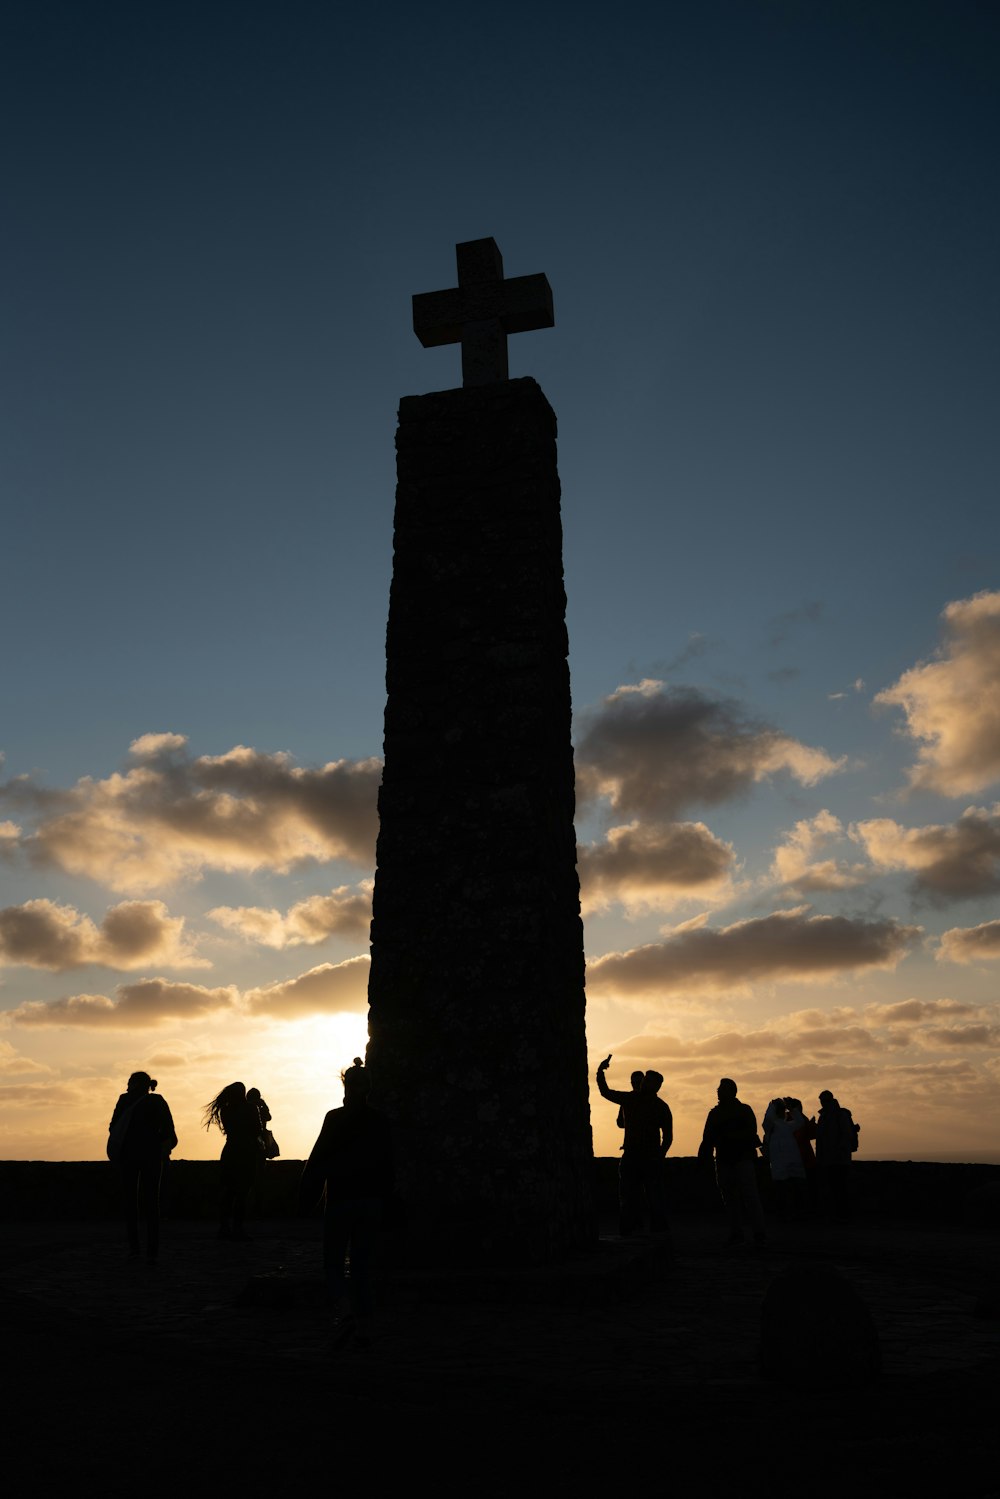 silhouette of people standing near cross under cloudy sky during daytime